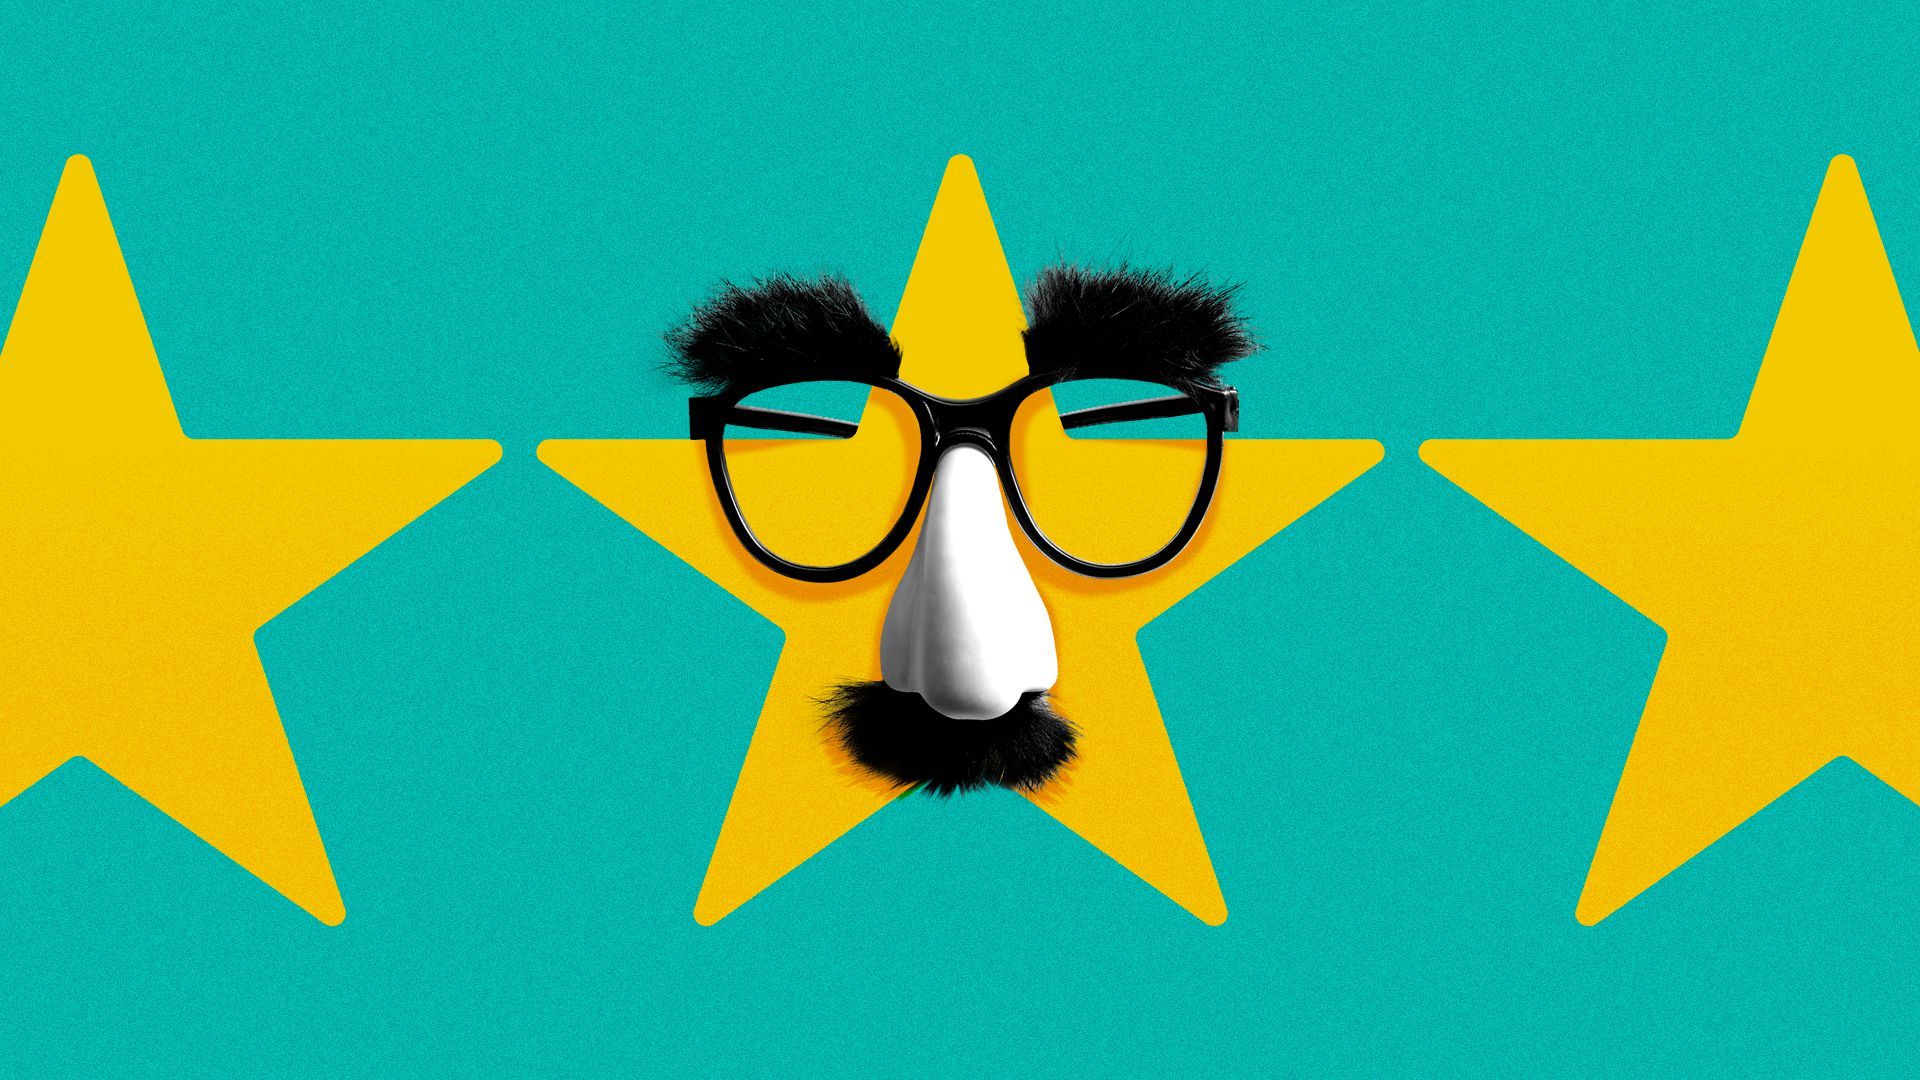 Illustration of three stars, one of which is wearing a fake nose, mustache and glasses disguise.